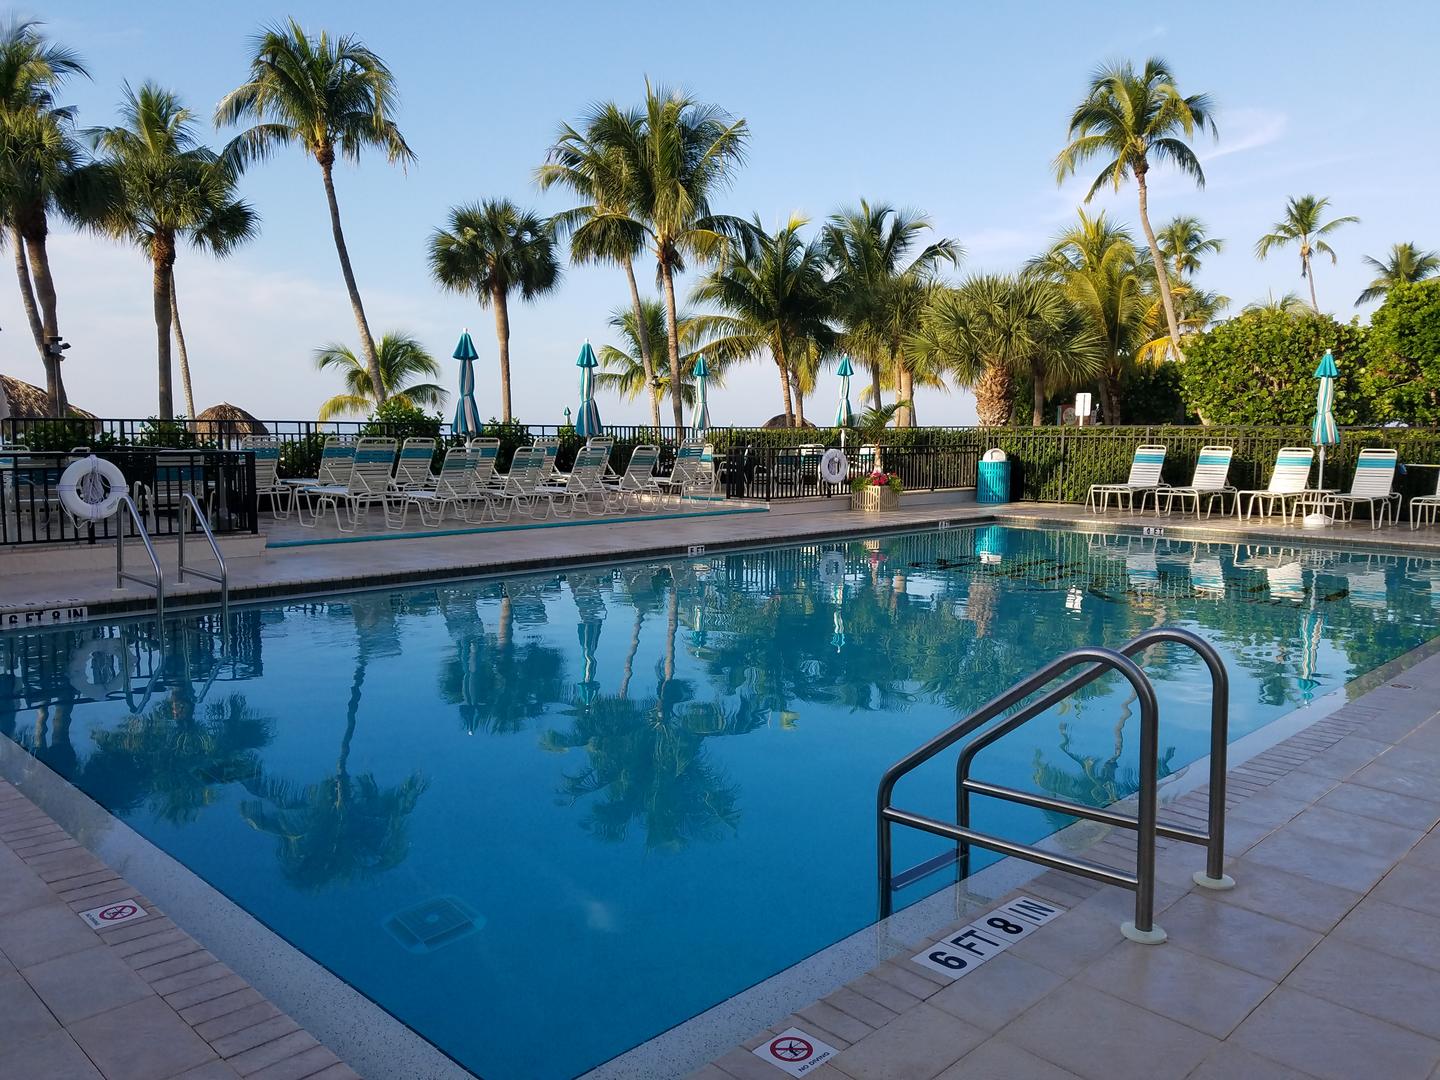 Caper Beach Club 212: 2 Bedroom With Pool (126564) - Find Rentals